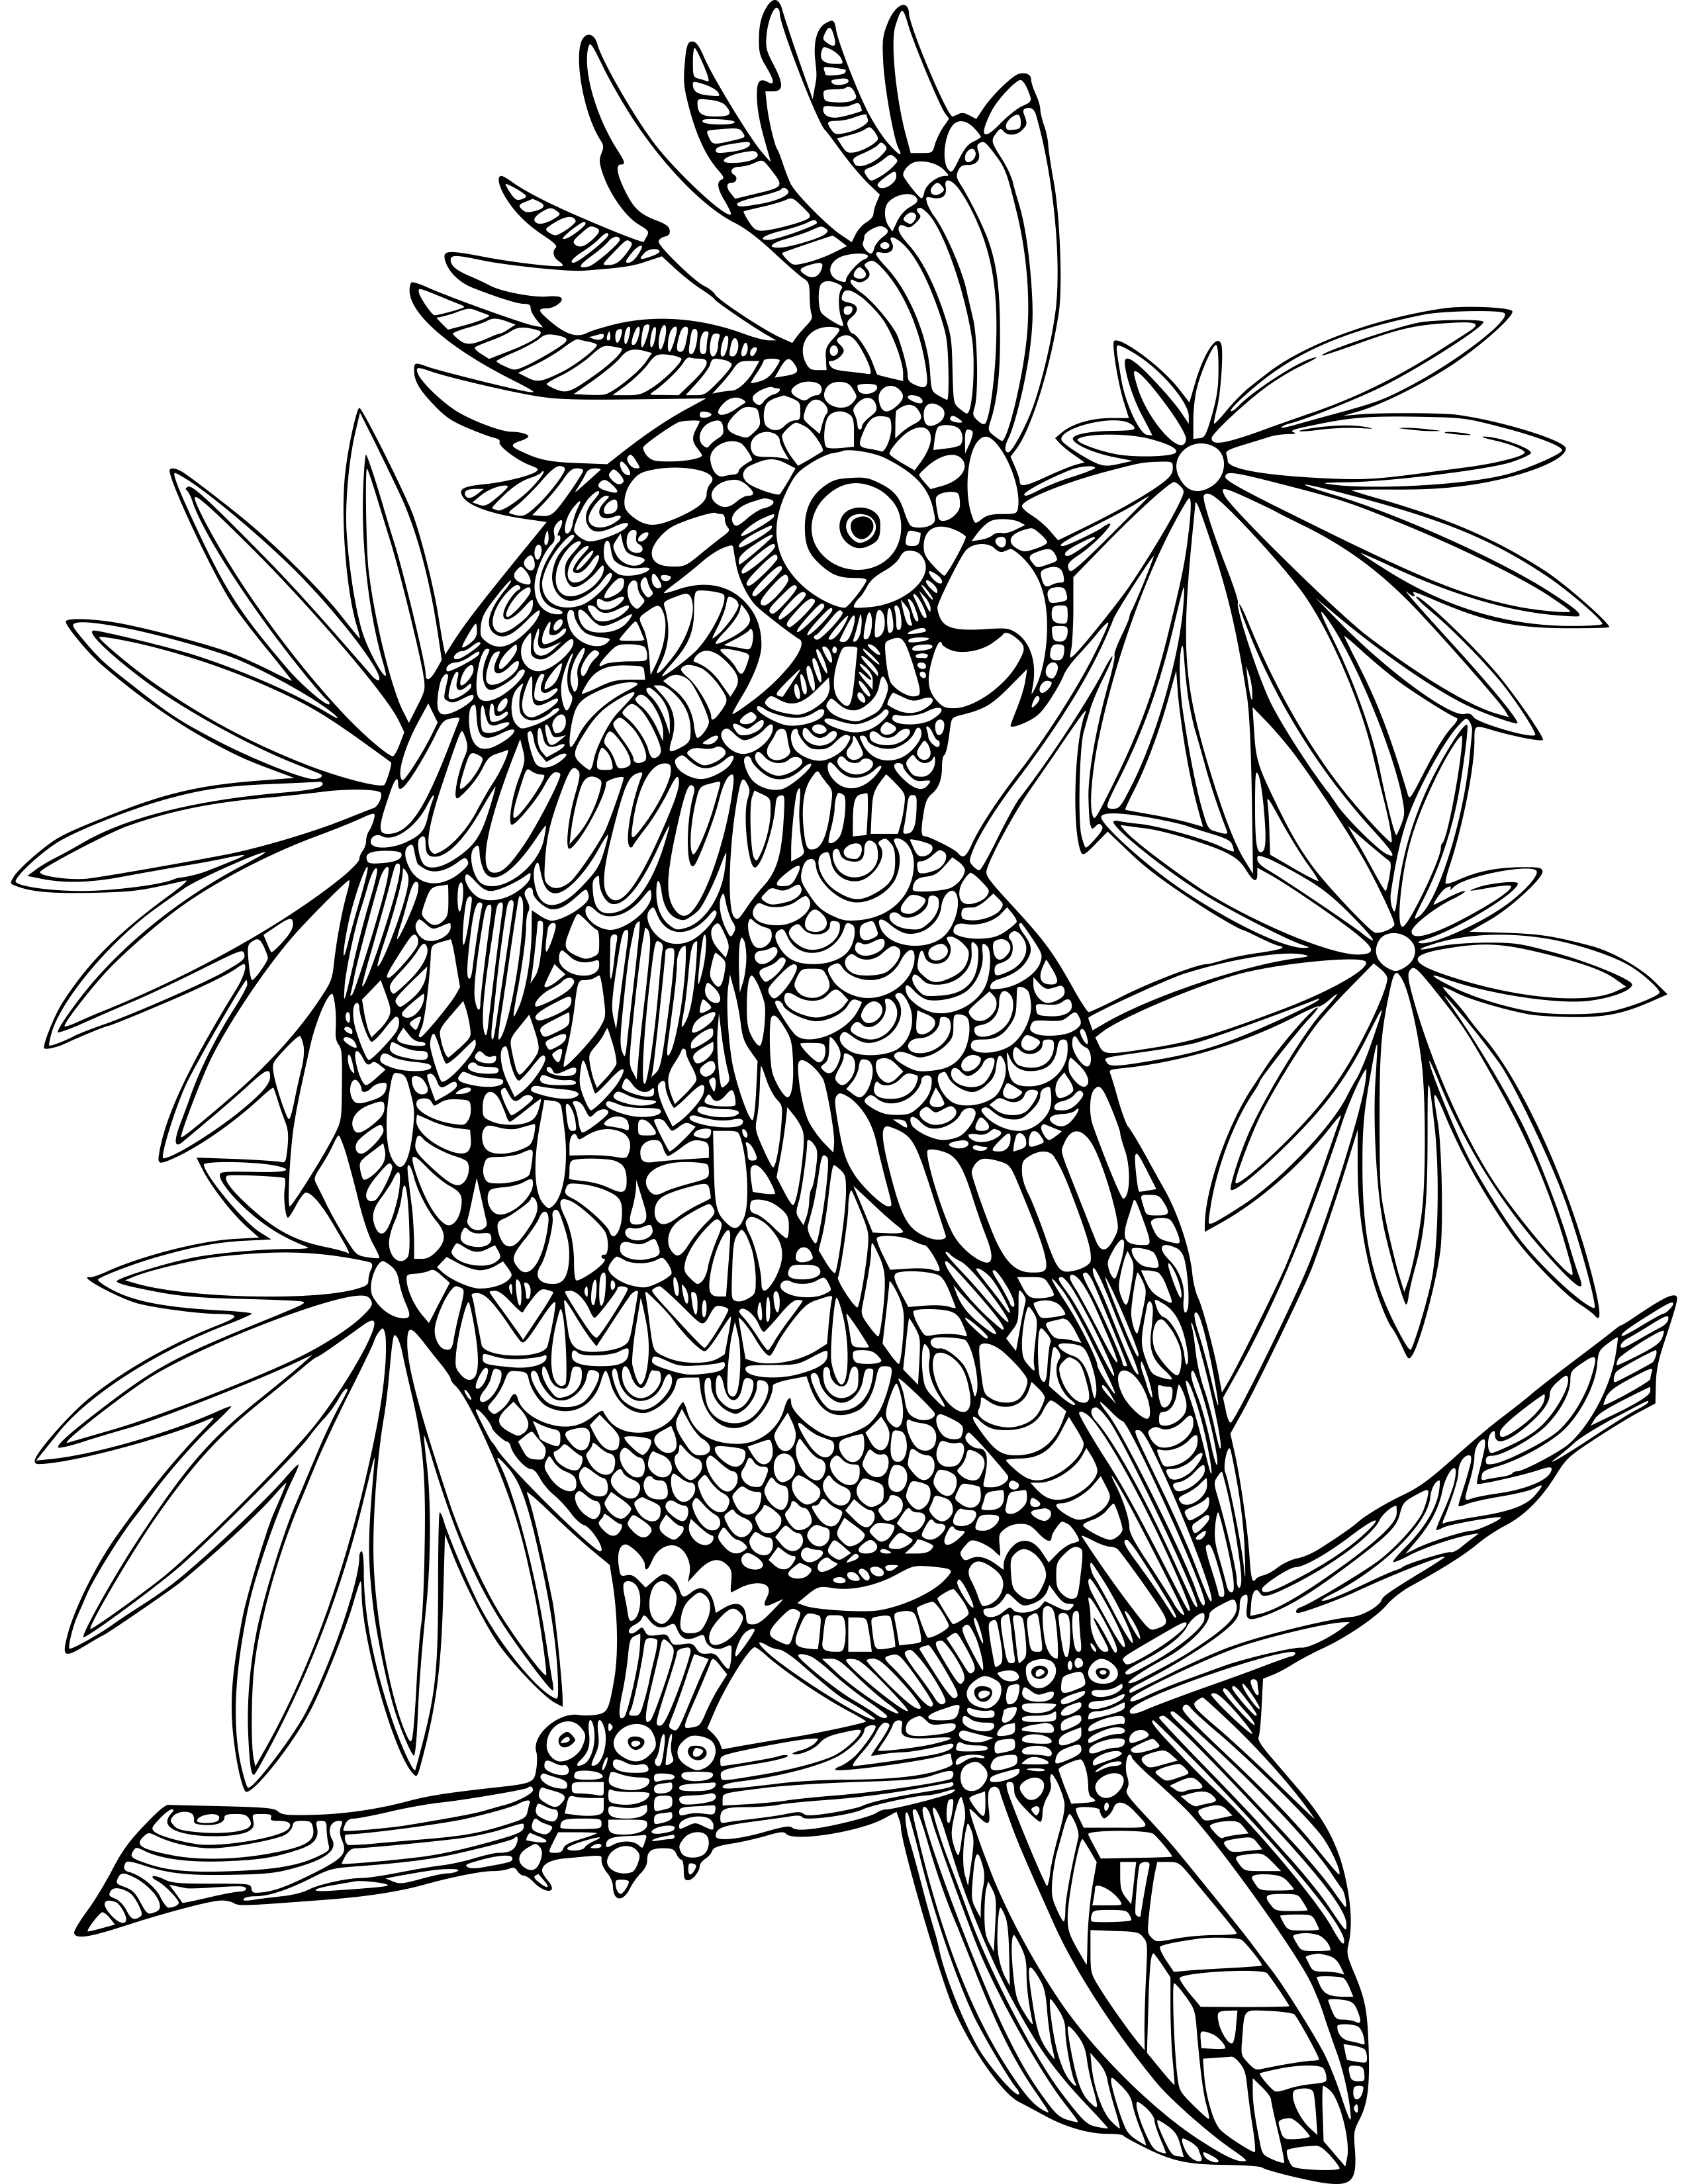 veterinary-coloring-pages-sketch-coloring-page